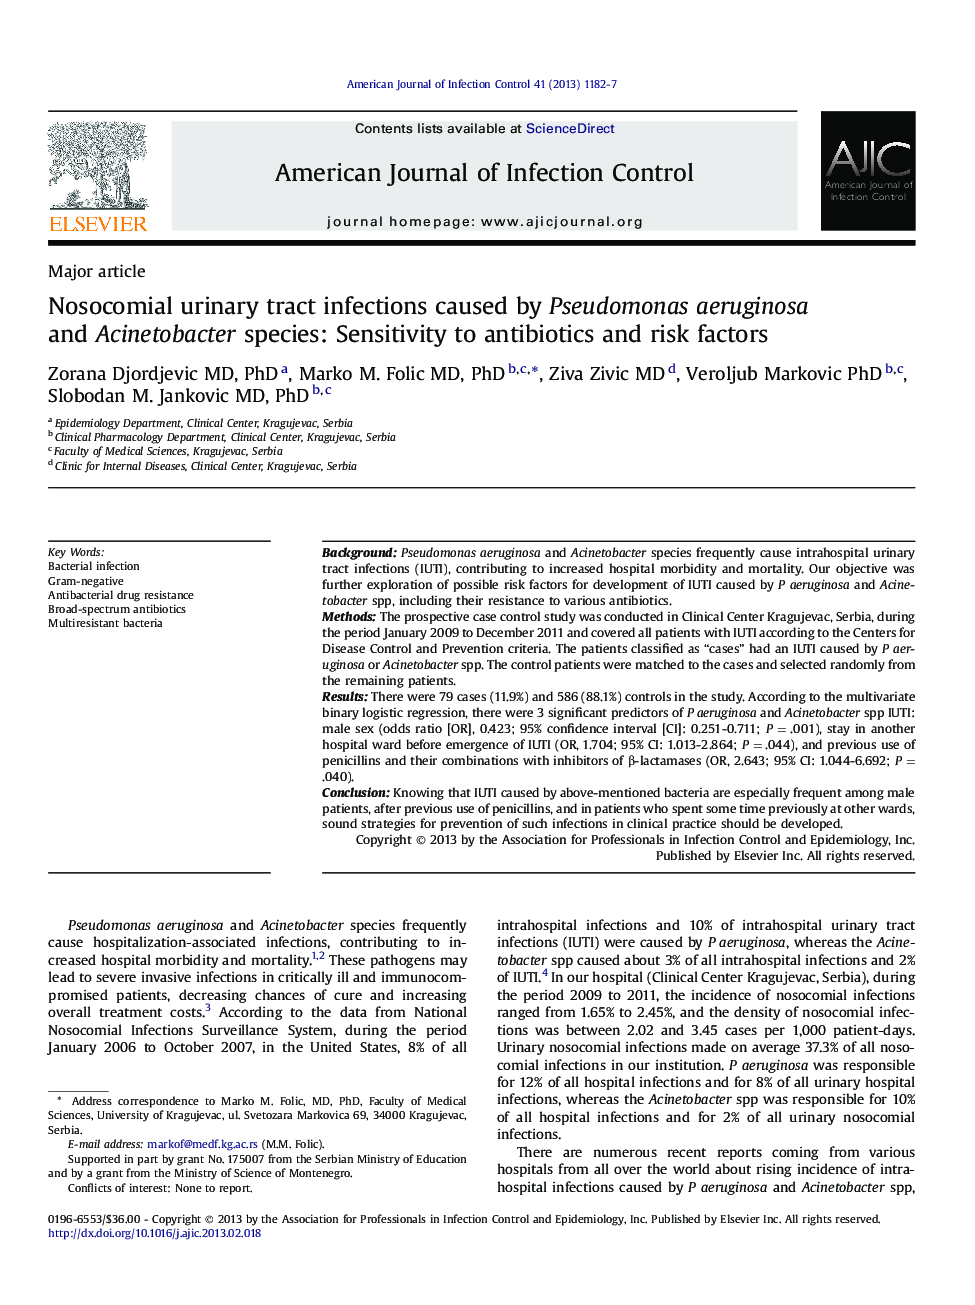 Nosocomial urinary tract infections caused by Pseudomonas aeruginosa and Acinetobacter species: Sensitivity to antibiotics and risk factors 